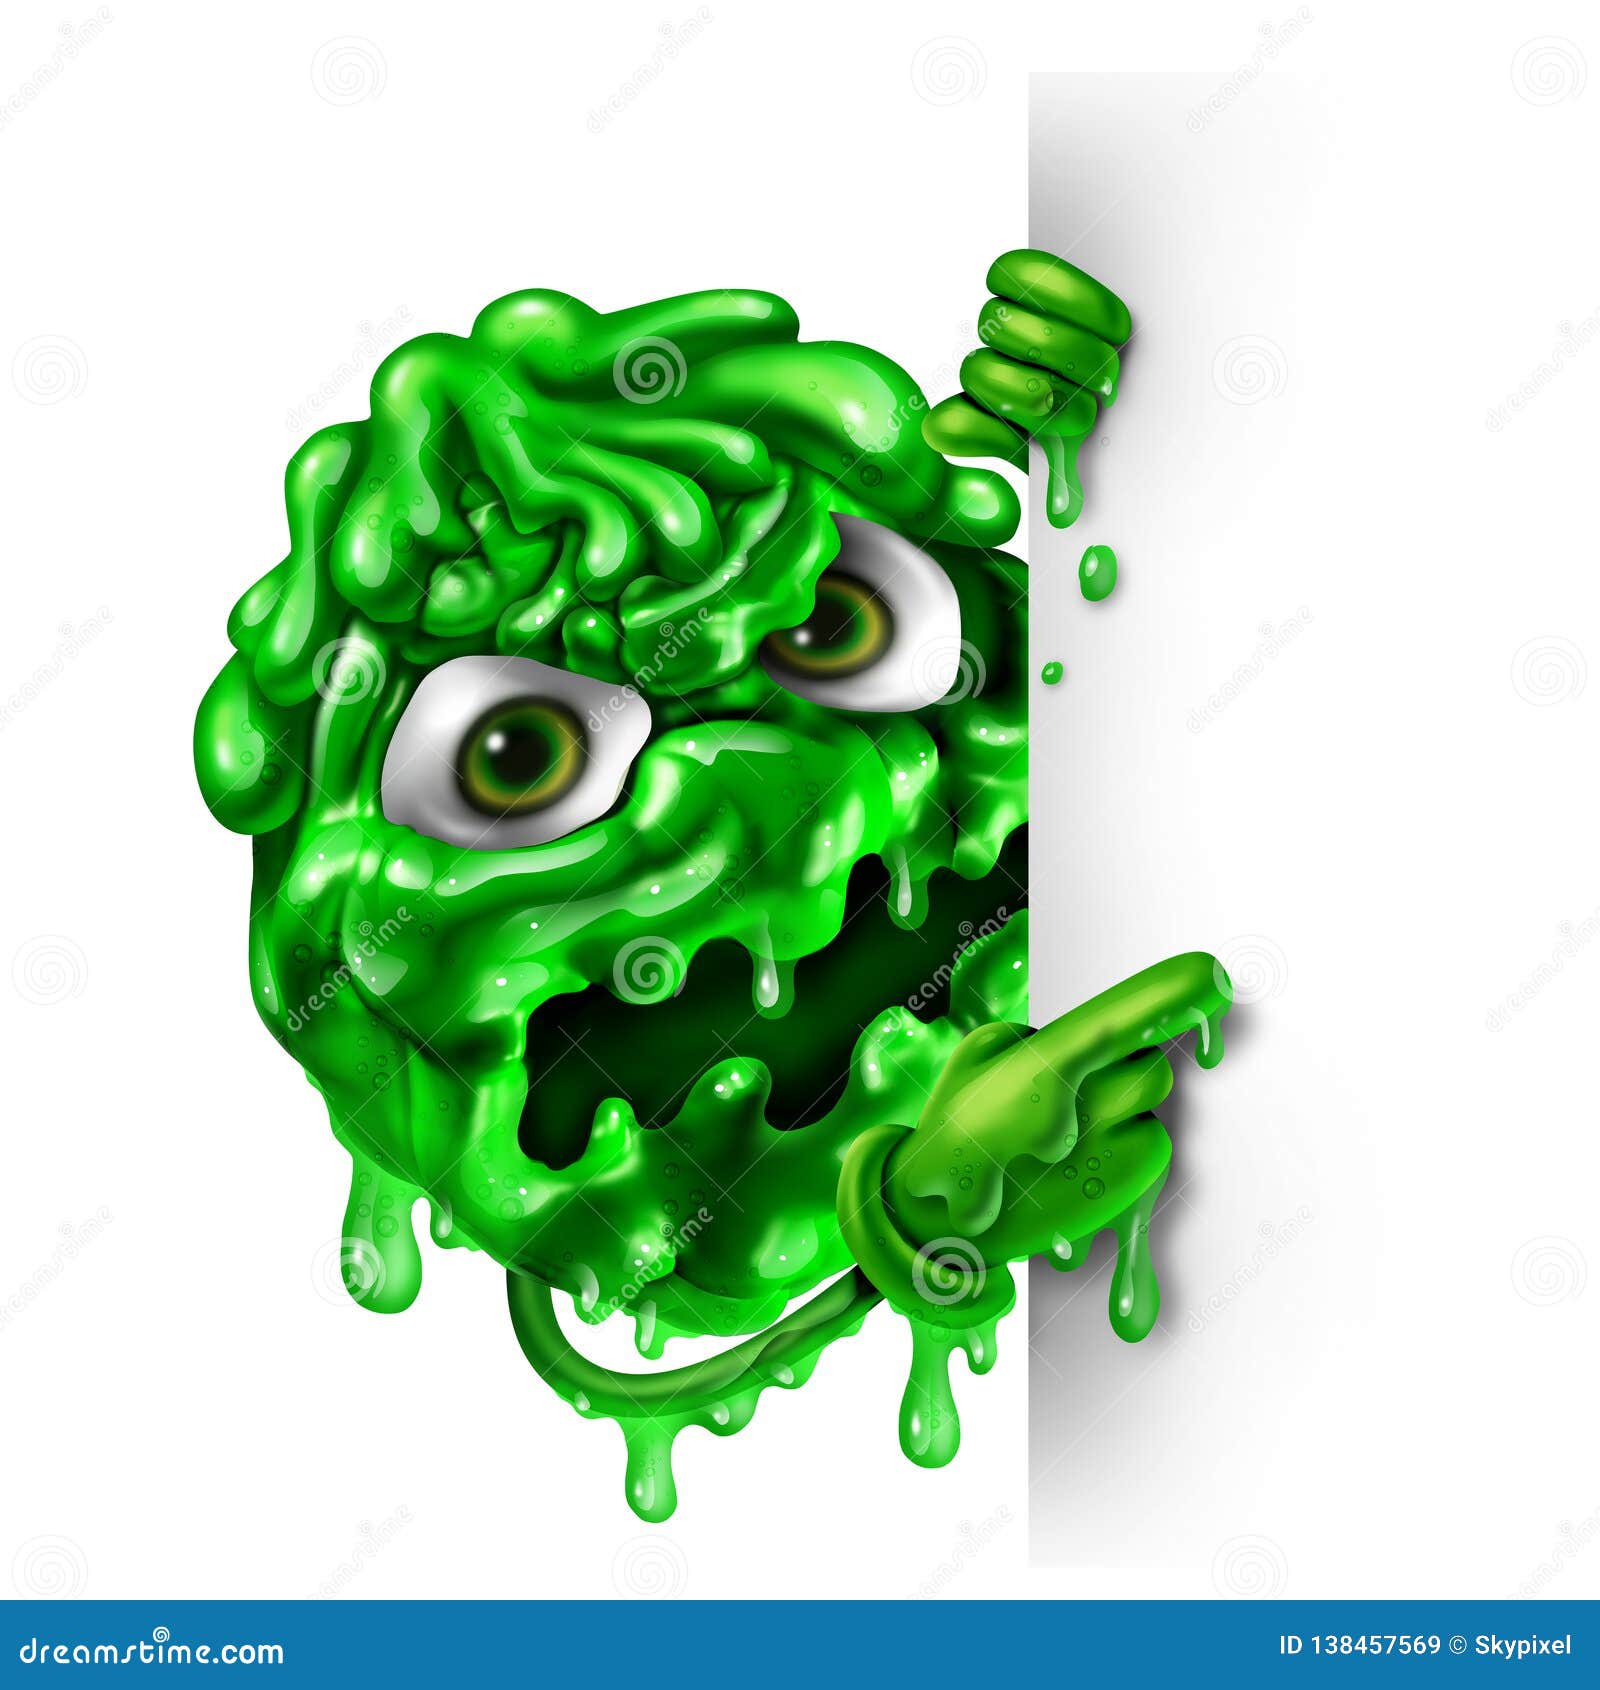 https://thumbs.dreamstime.com/z/mucus-character-as-green-snot-concept-runny-nose-liquid-shaped-contagious-monster-blank-sign-medical-illness-symbol-138457569.jpg